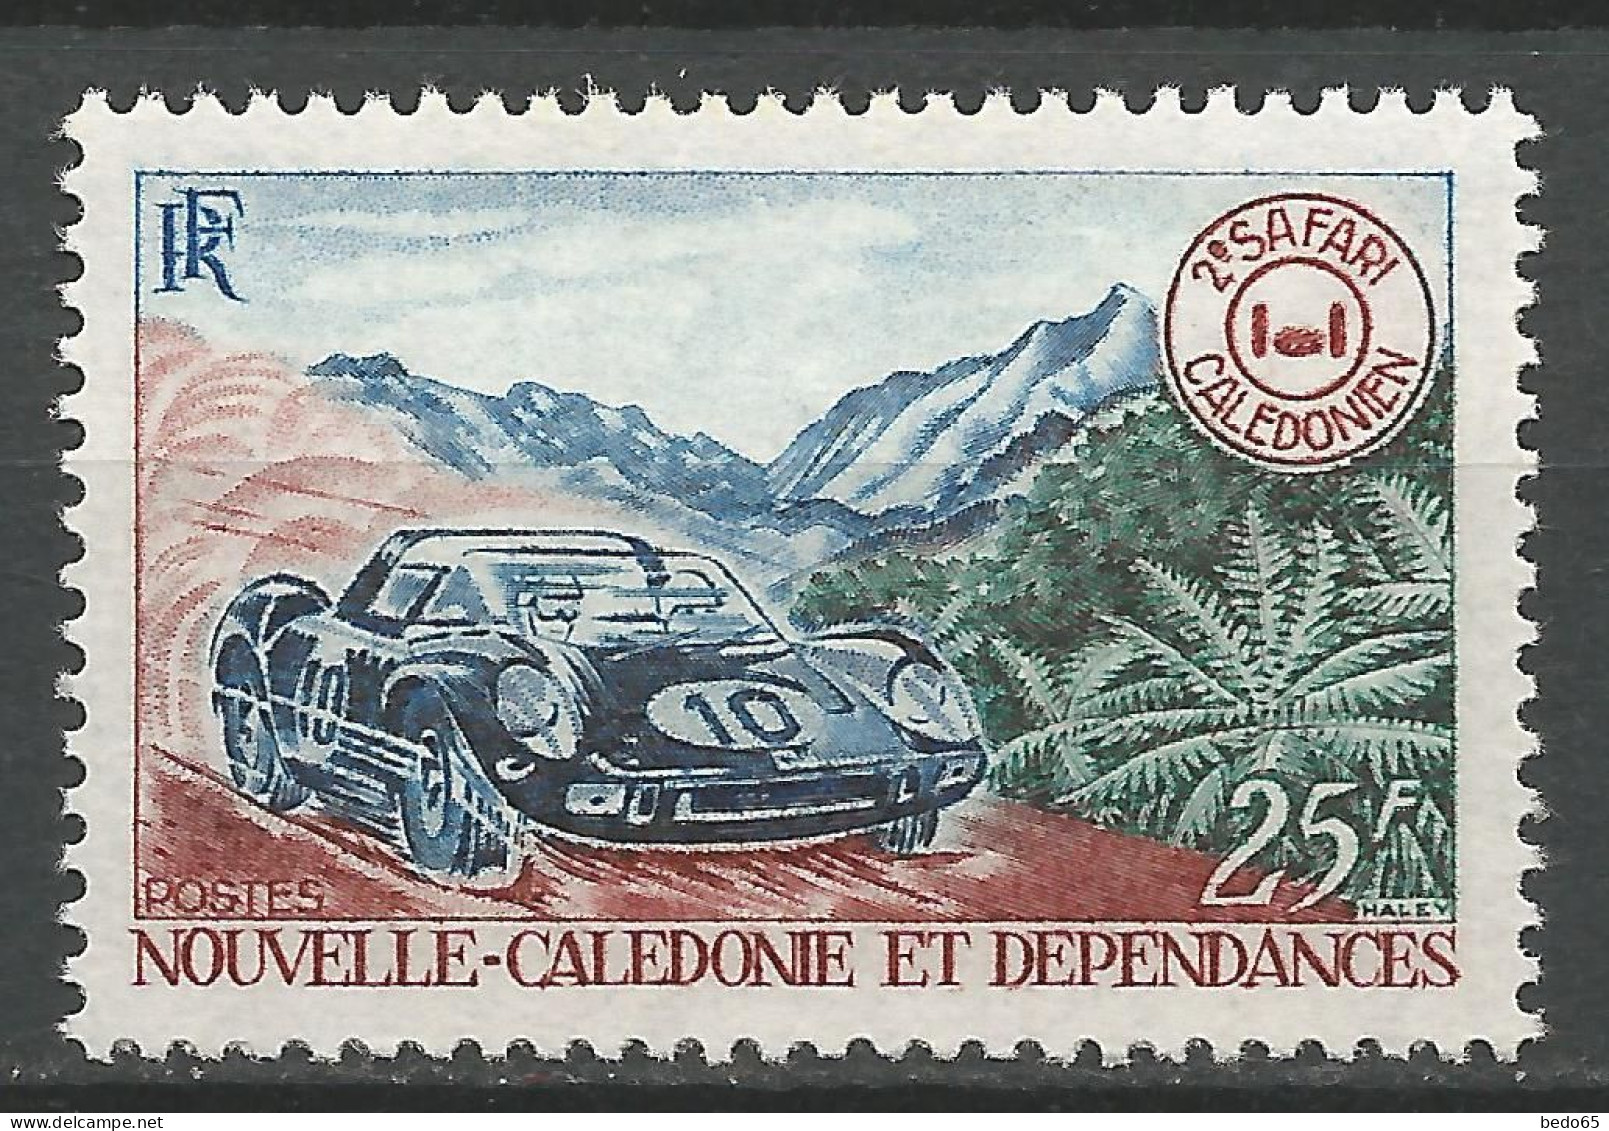 NOUVELLE-CALEDONIE N° 355 NEUF** LUXE SANS CHARNIERE / Hingeless  / MNH - Neufs